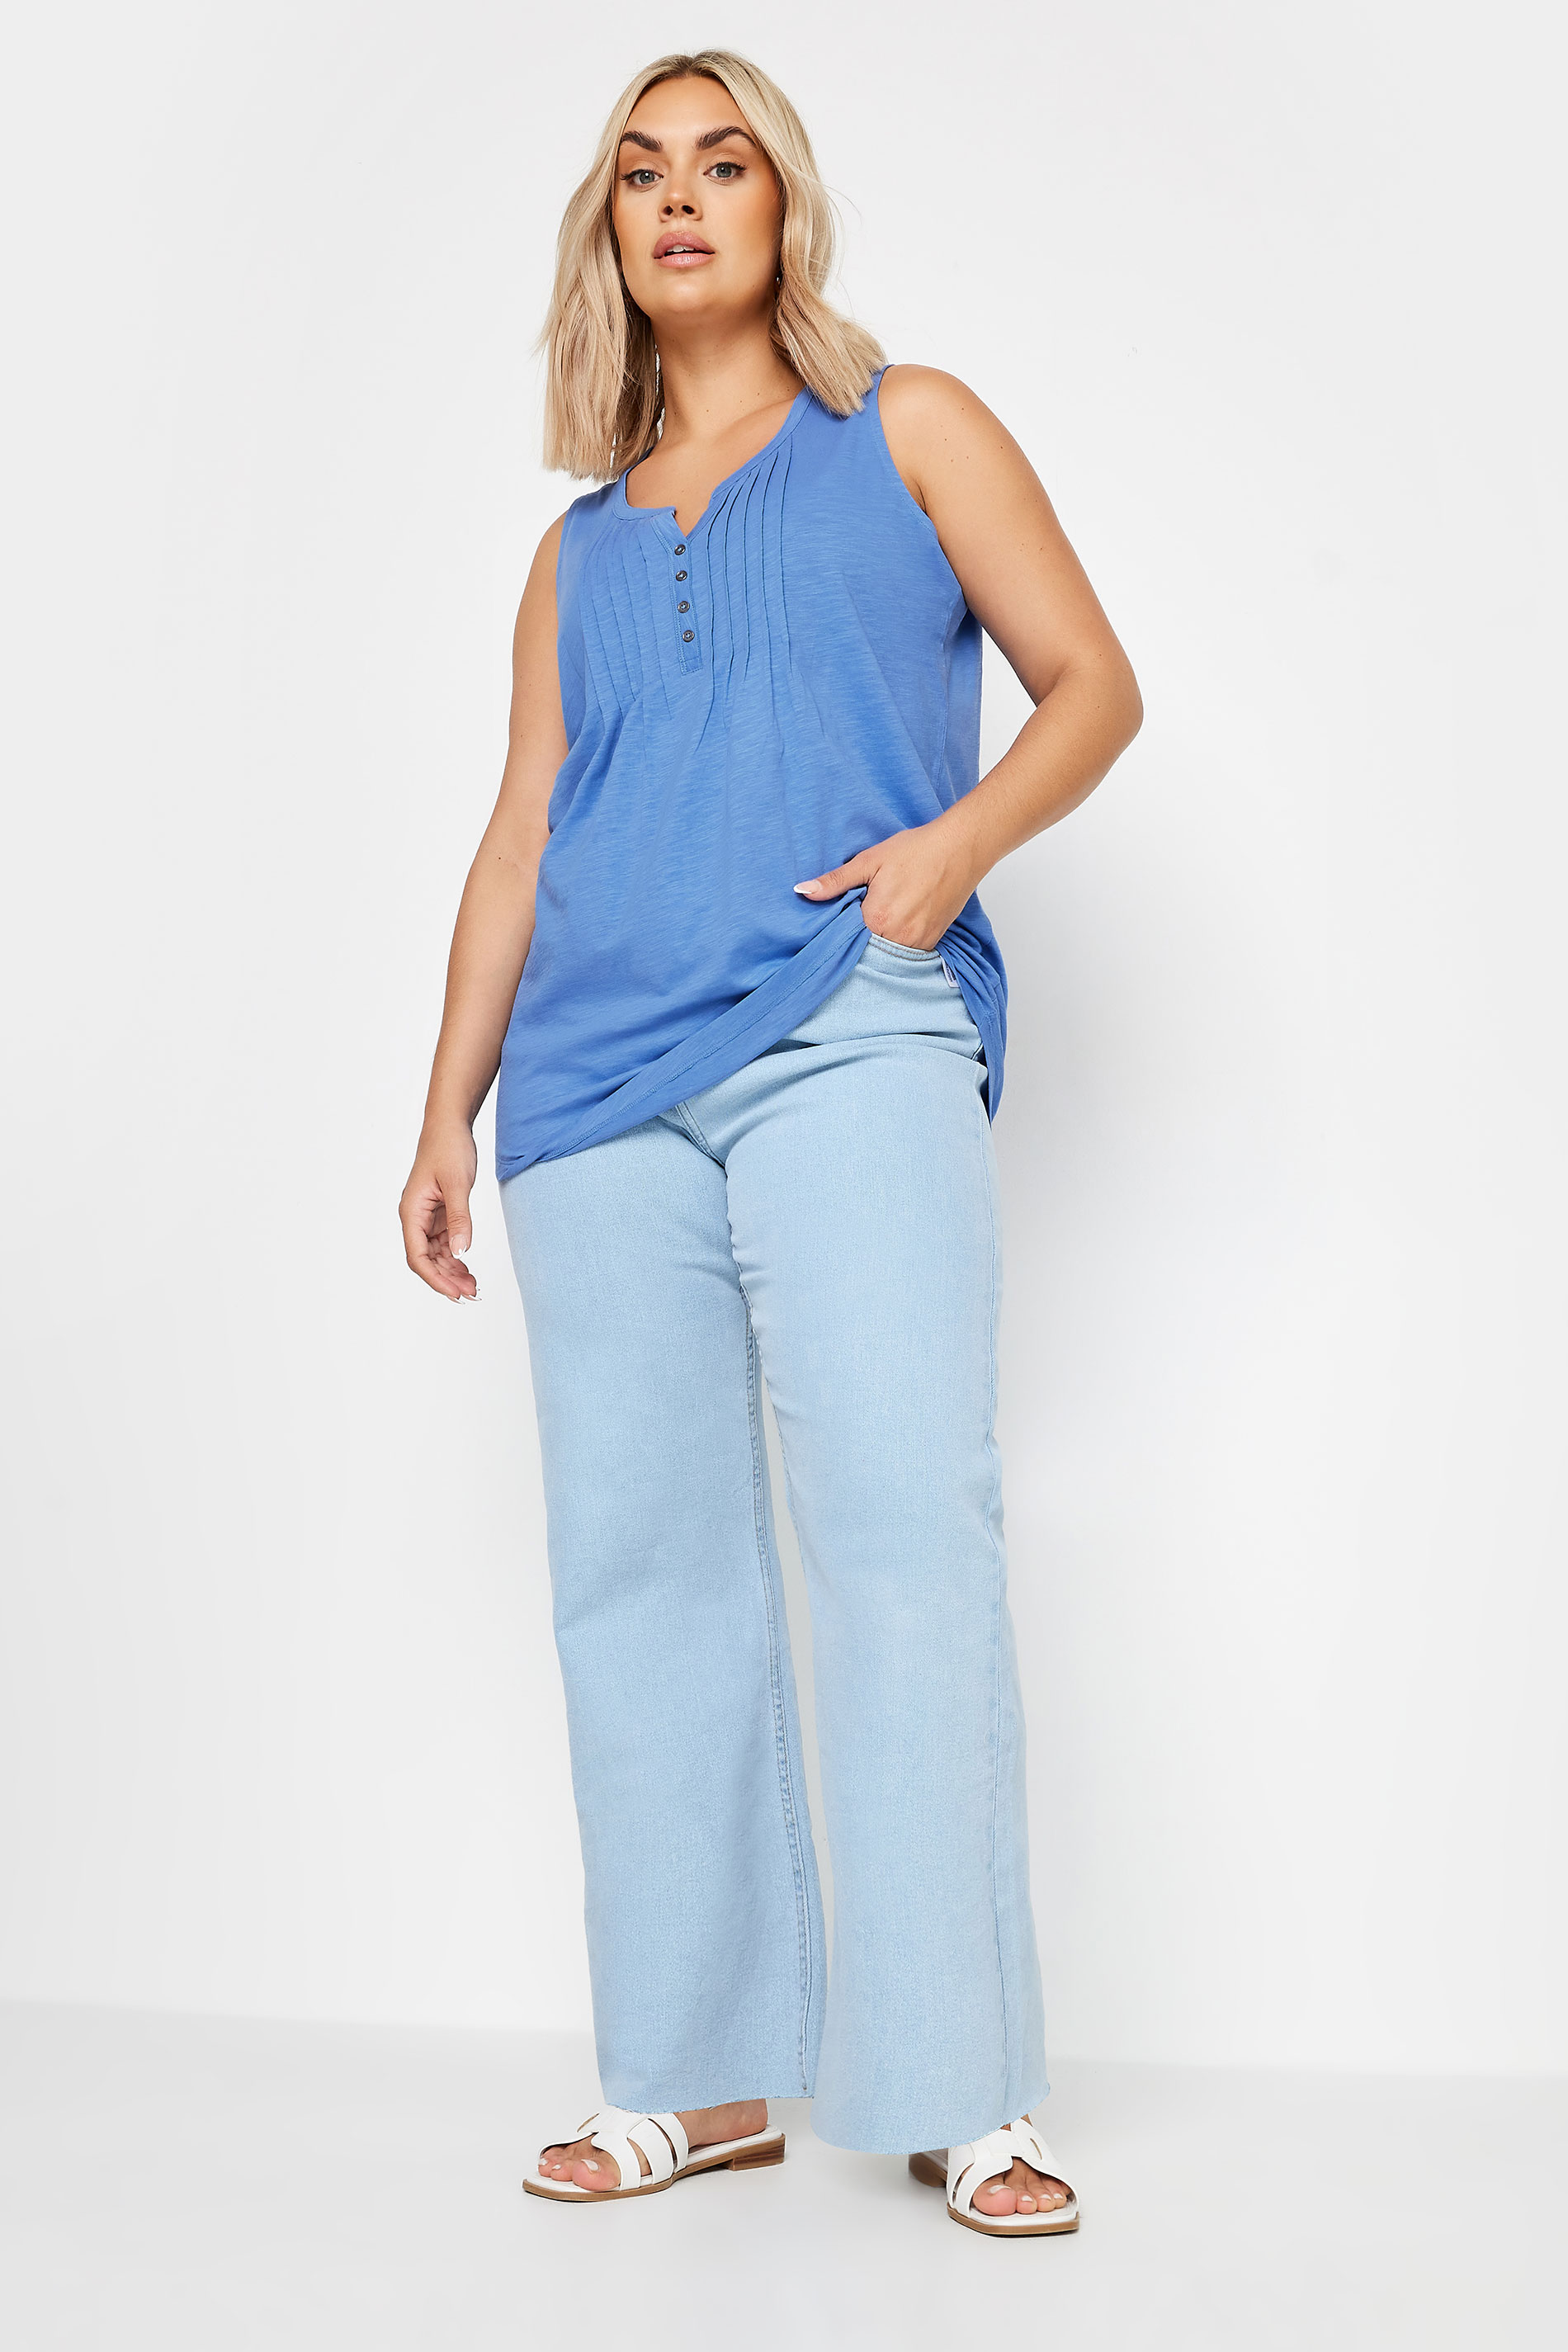 YOURS Plus Size Blue Pintuck Henley Vest Top | Yours Clothing 2